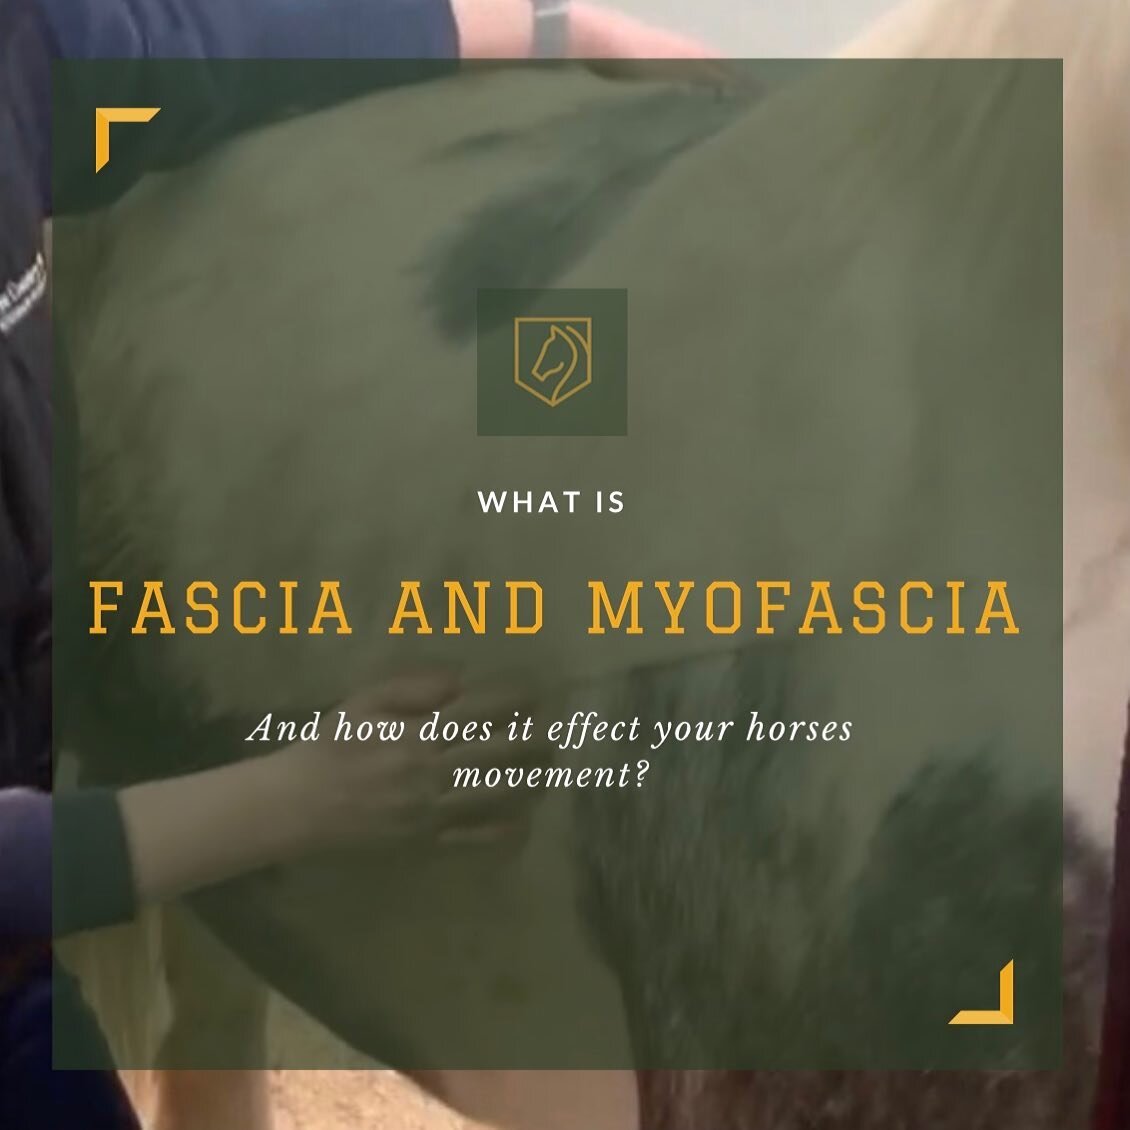 🐎 Fascia is the sheet of connective tissue beneath the skin that attaches, stabilizes, encloses, and separates muscles and other internal organs; myofascia is the name given to the fascia that surrounds muscles. It&rsquo;s main roles are to provide 